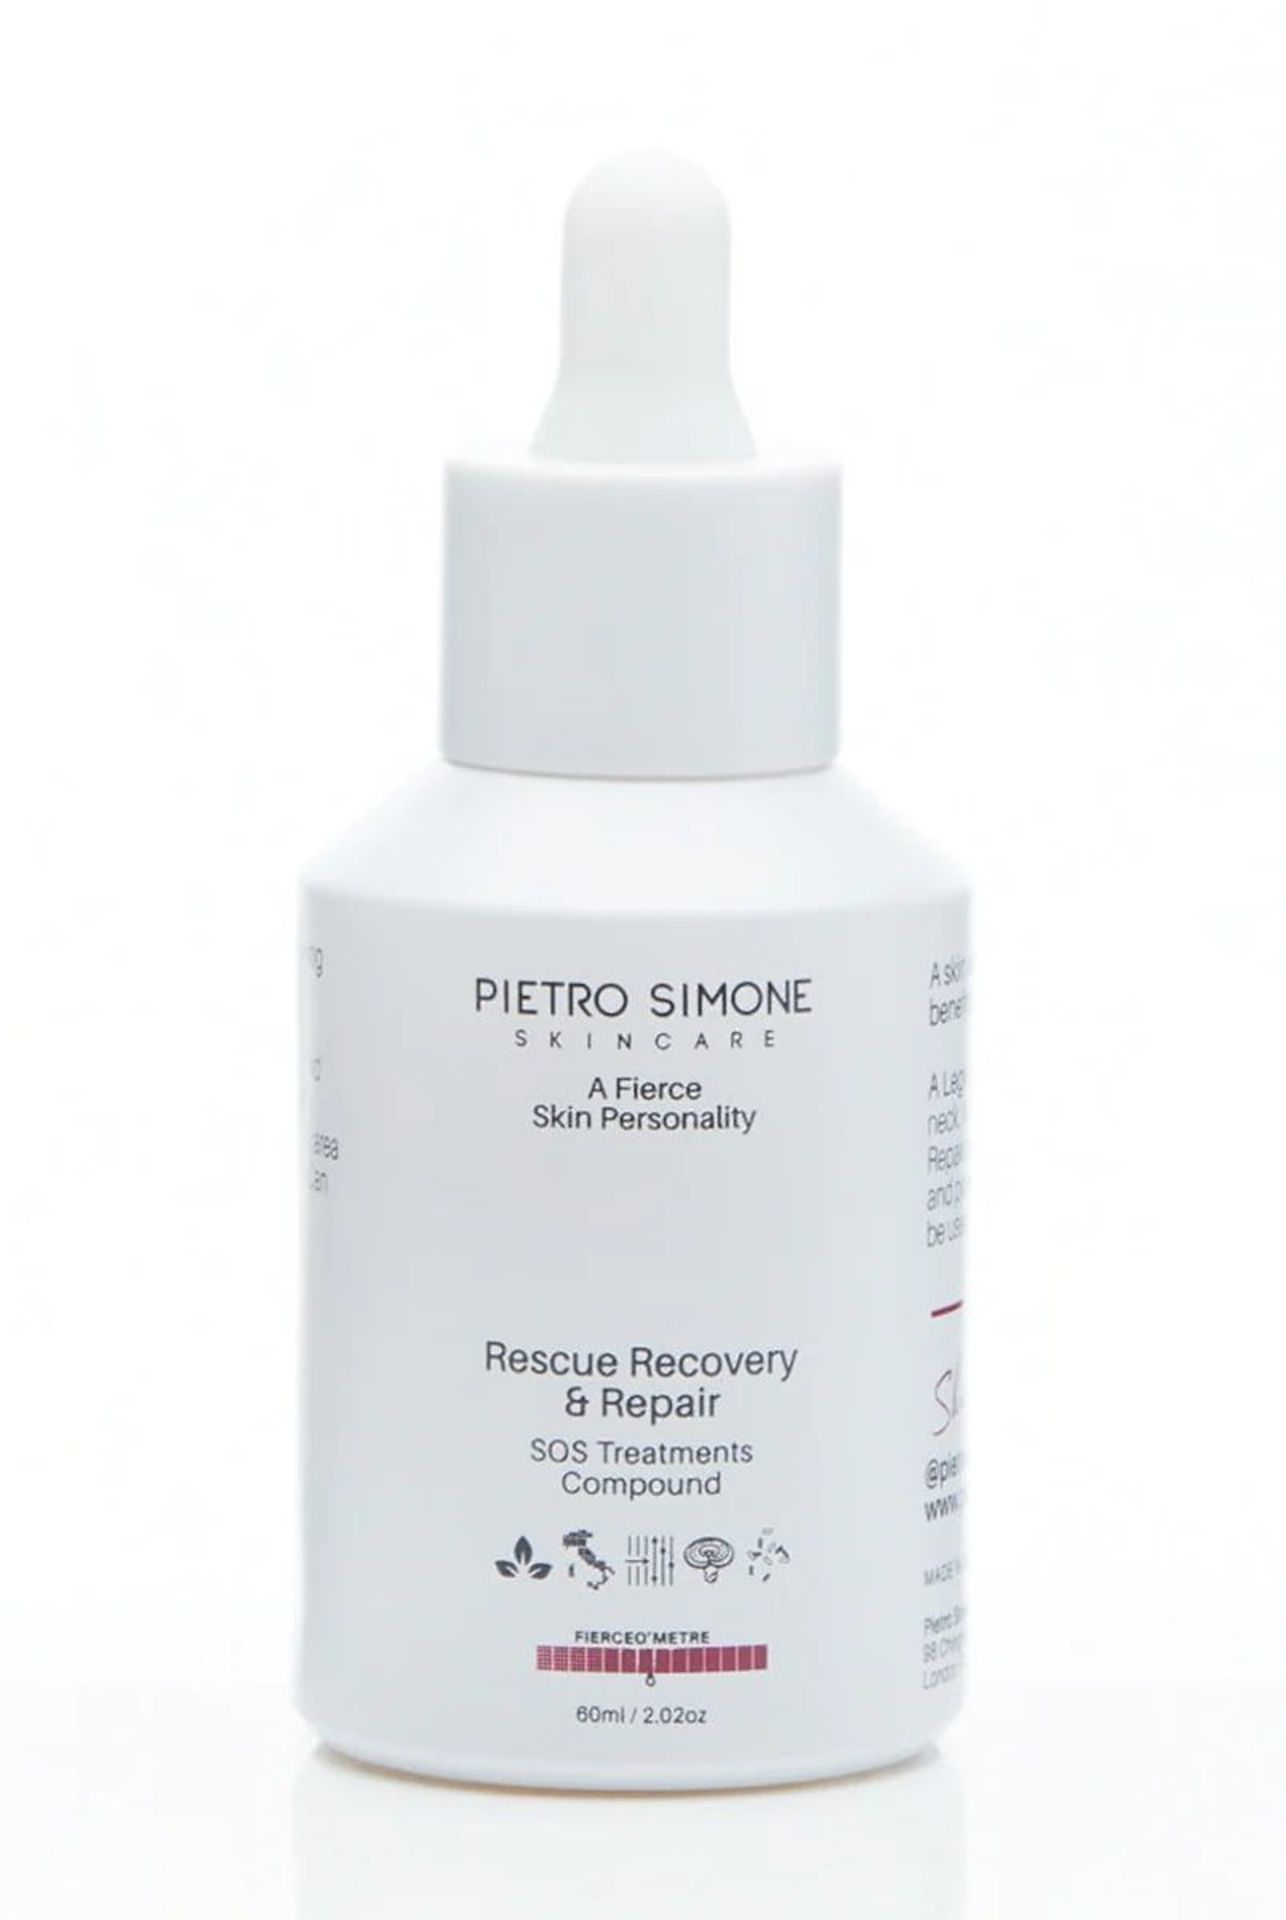 2x BRAND NEW PIETRO SIMONE The Fierce Collection Rescue Recovery & Repair 60ml. RRP £65 EACH. (OFC).